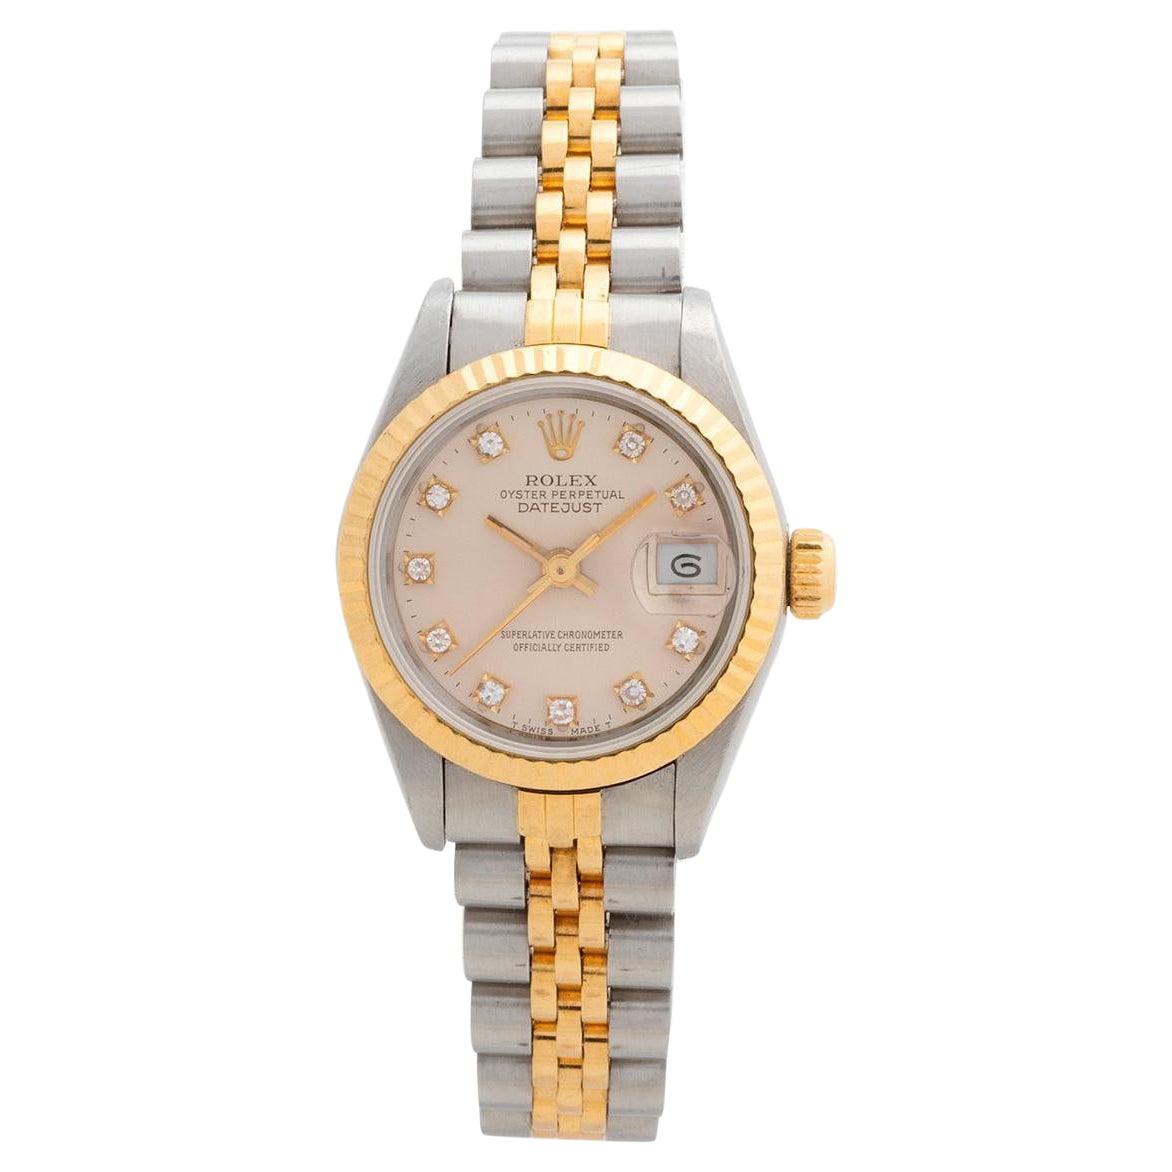 Our ladies Rolex Datejust reference 69173 features the classical combination of 18k yellow gold and stainless steel 26mm case with 18k yellow gold and stainless steel jubilee bracelet and also features a high quality aftermarket (custom) diamond dot